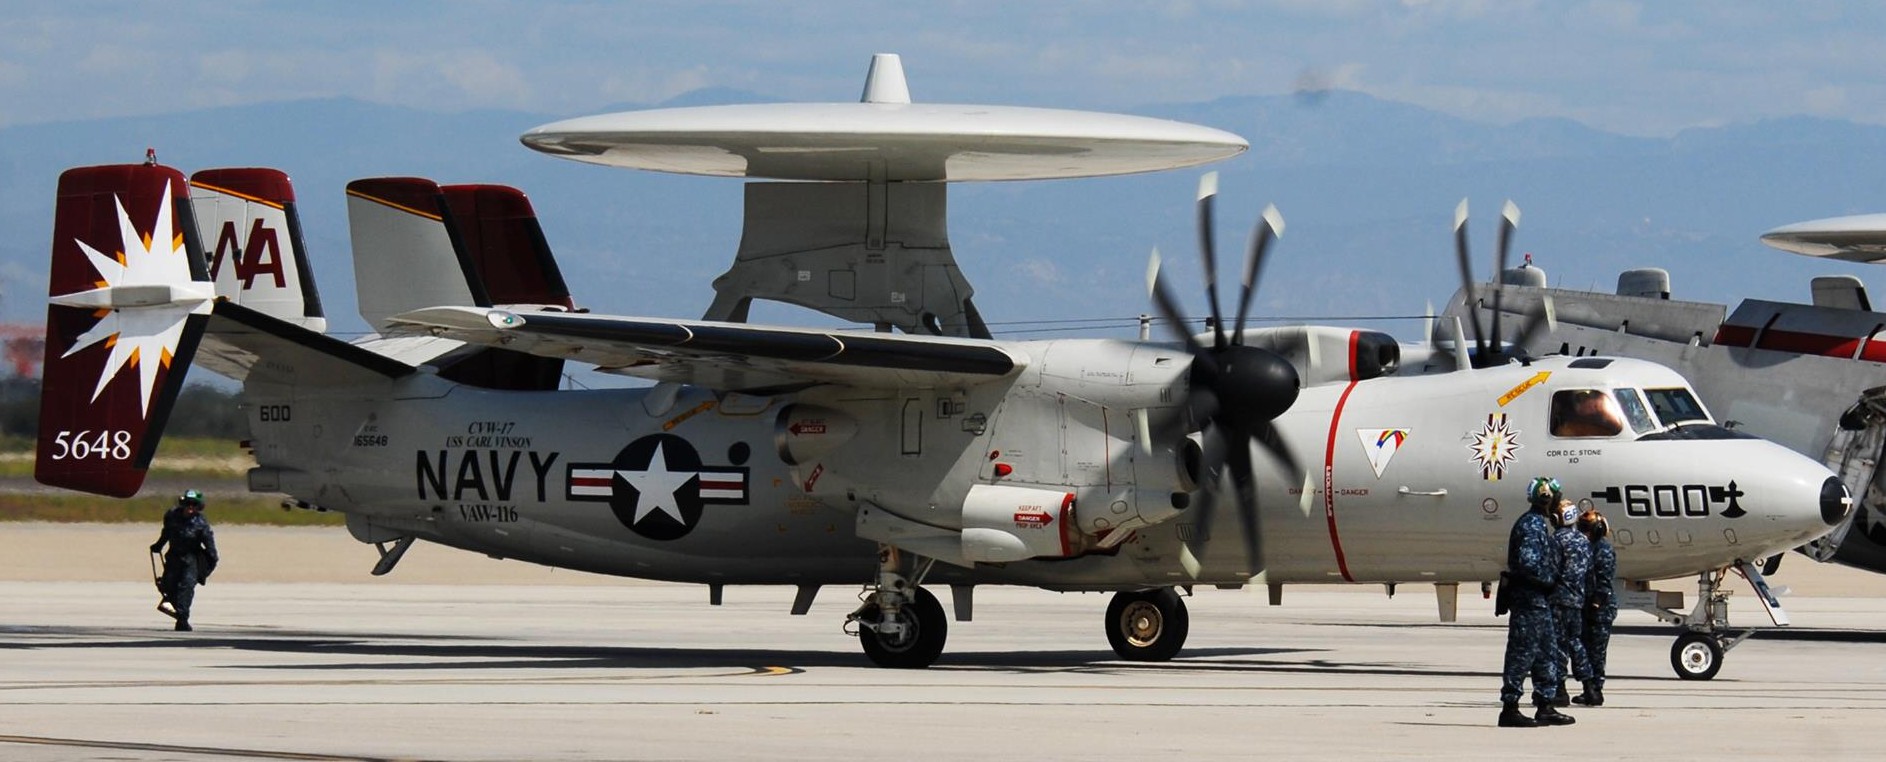 vaw-116 sun kings airborne command control squadron carrier early warning cvw-17 naval base ventura county point mugu 36